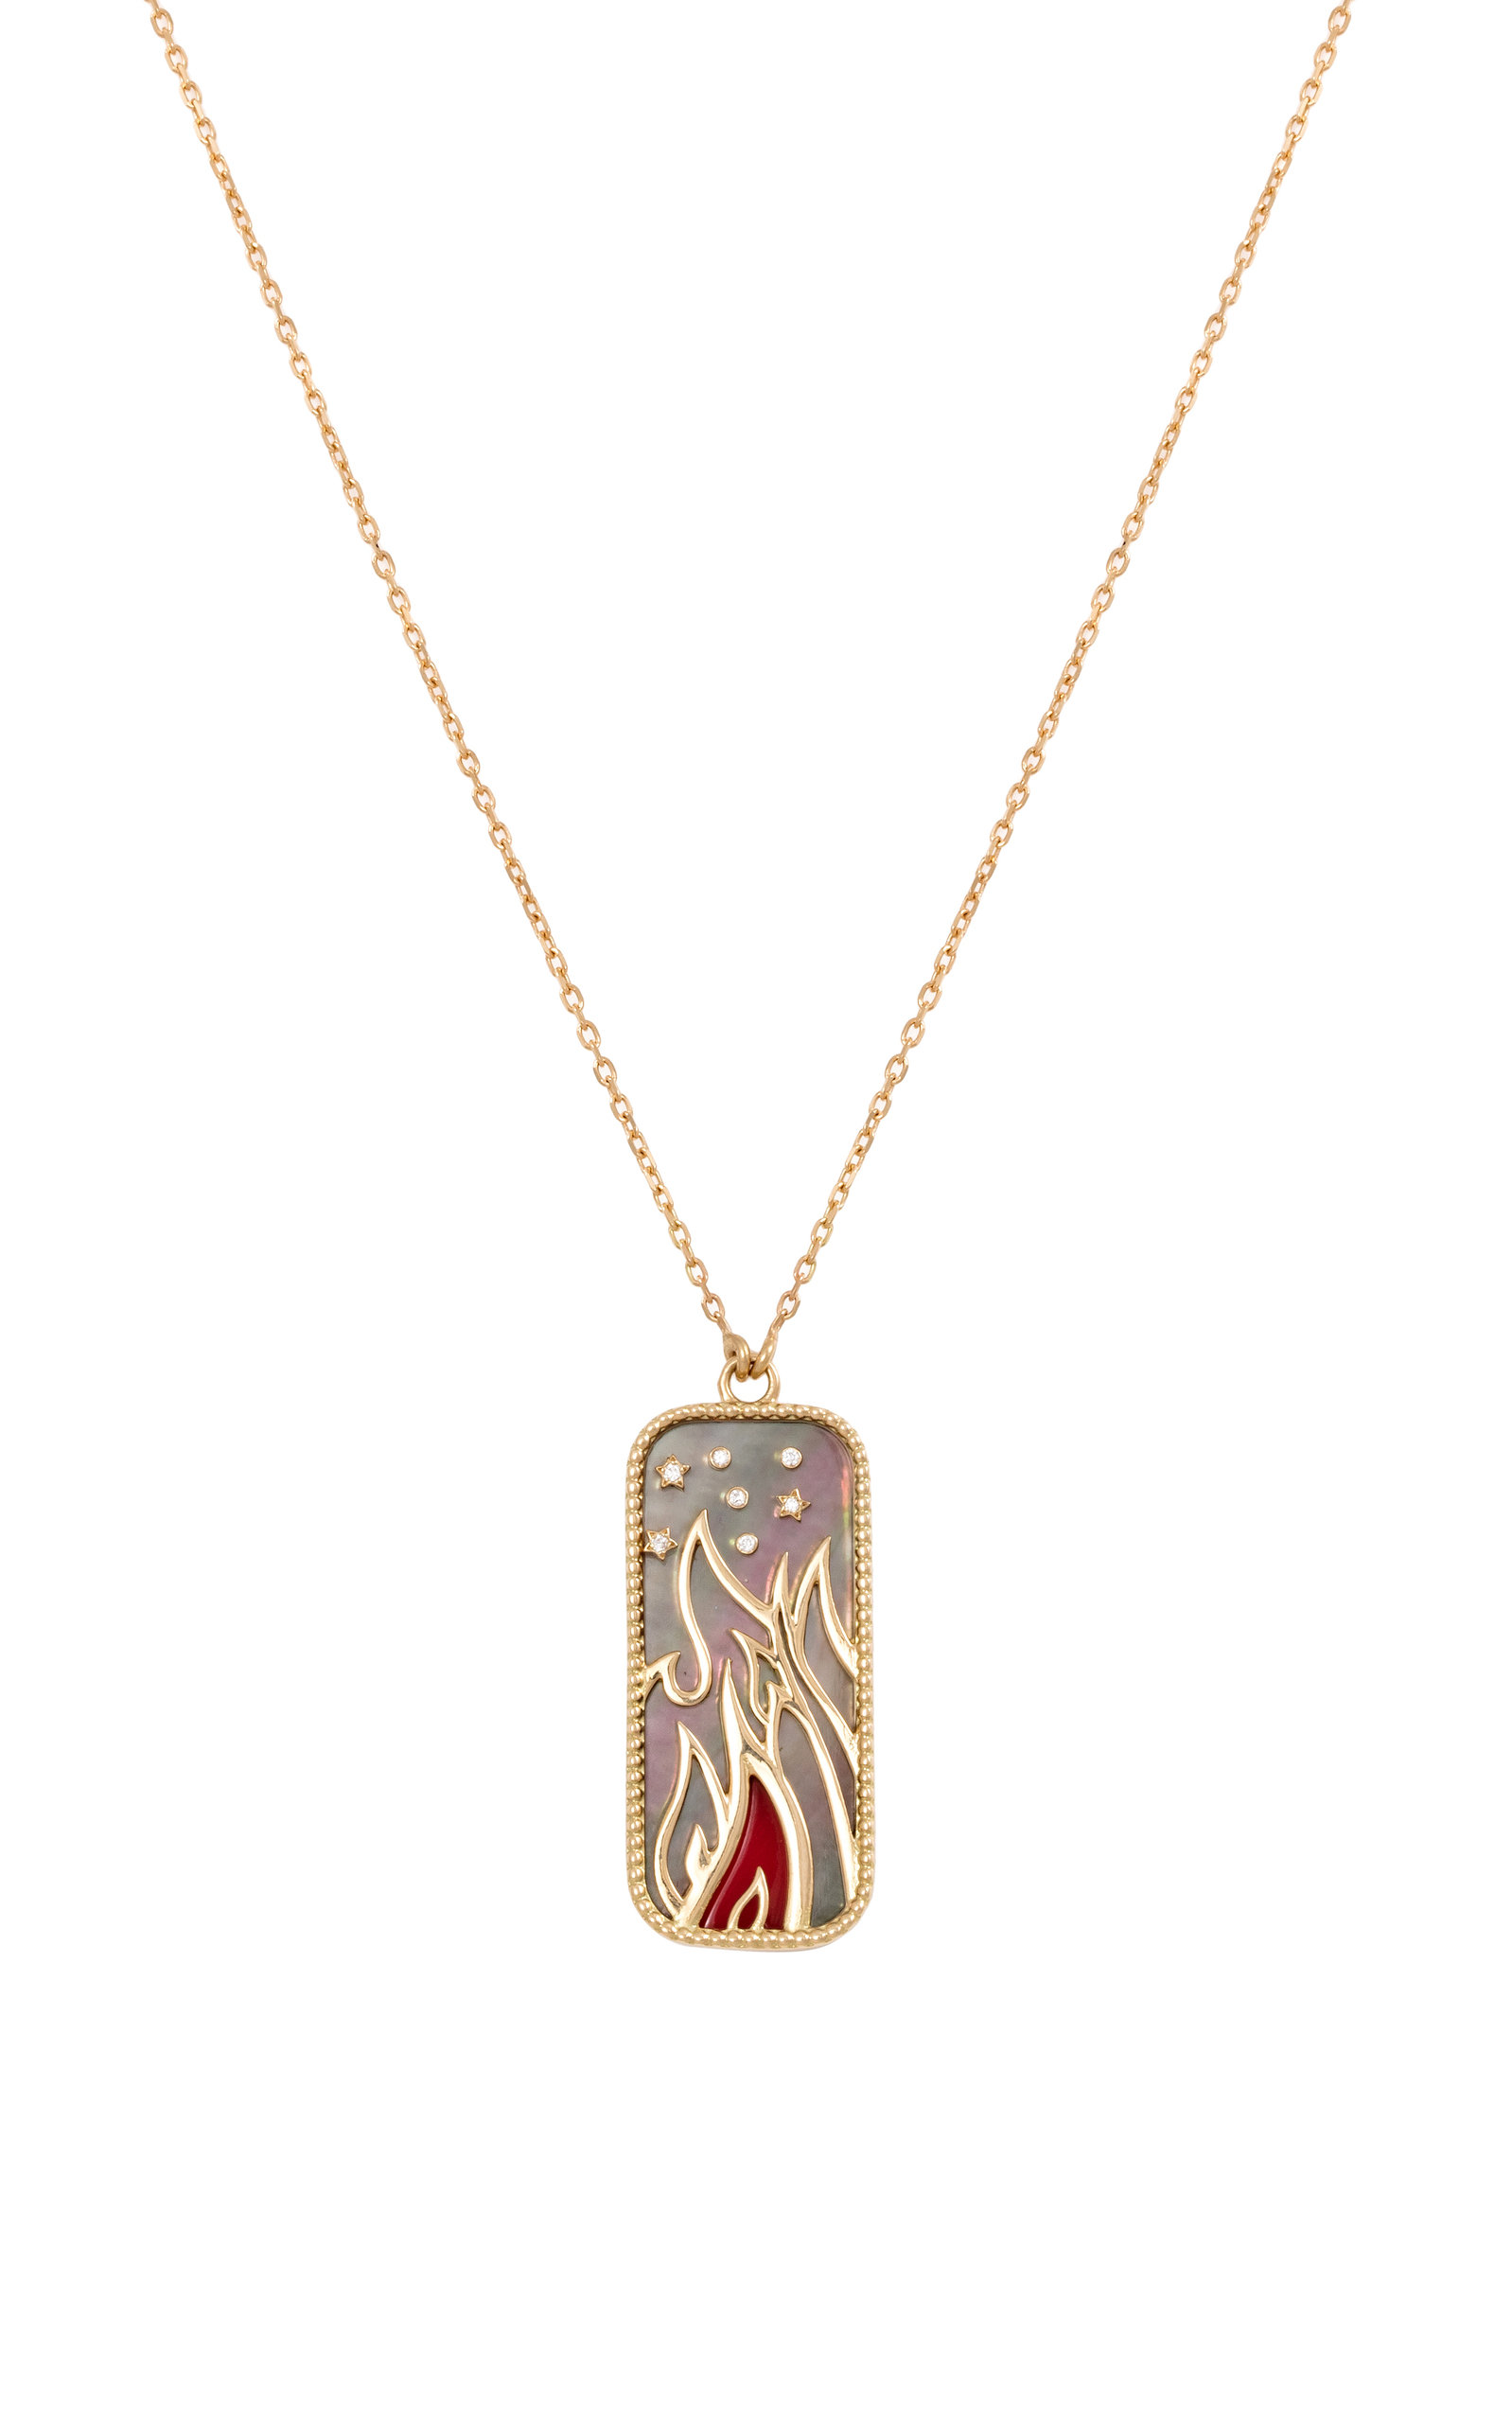 Elements of Love 18K Yellow Gold Fire Pendant Necklace